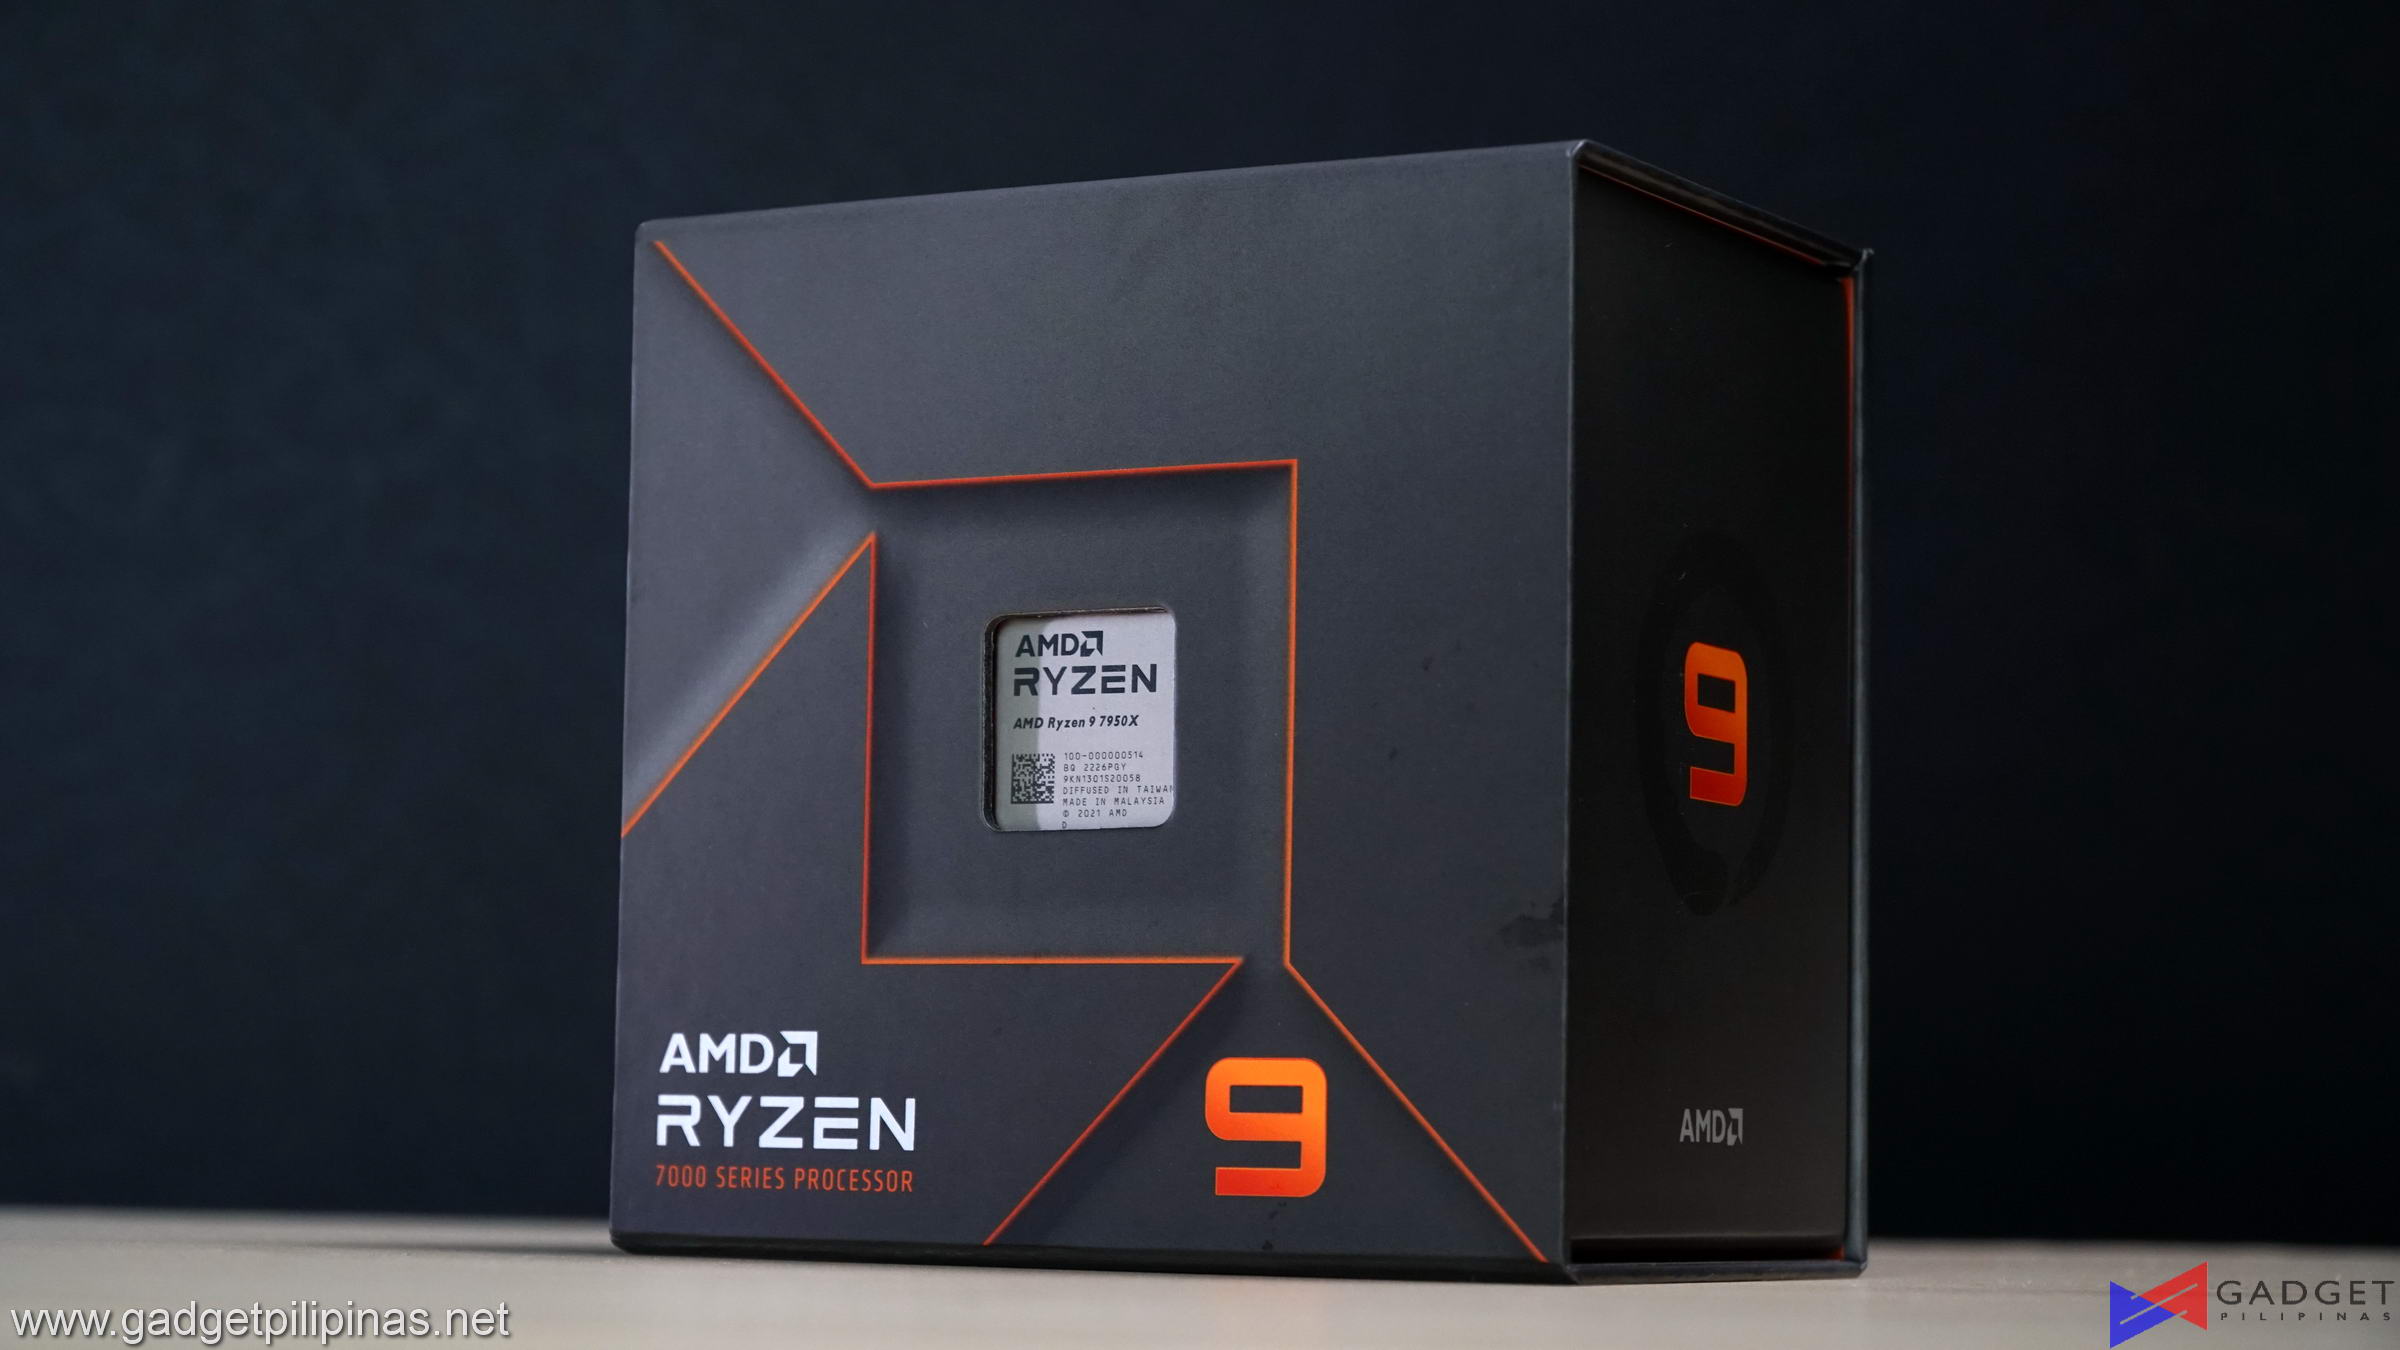 AMD Ryzen 9 7950X Review – Delivering What’s Promised